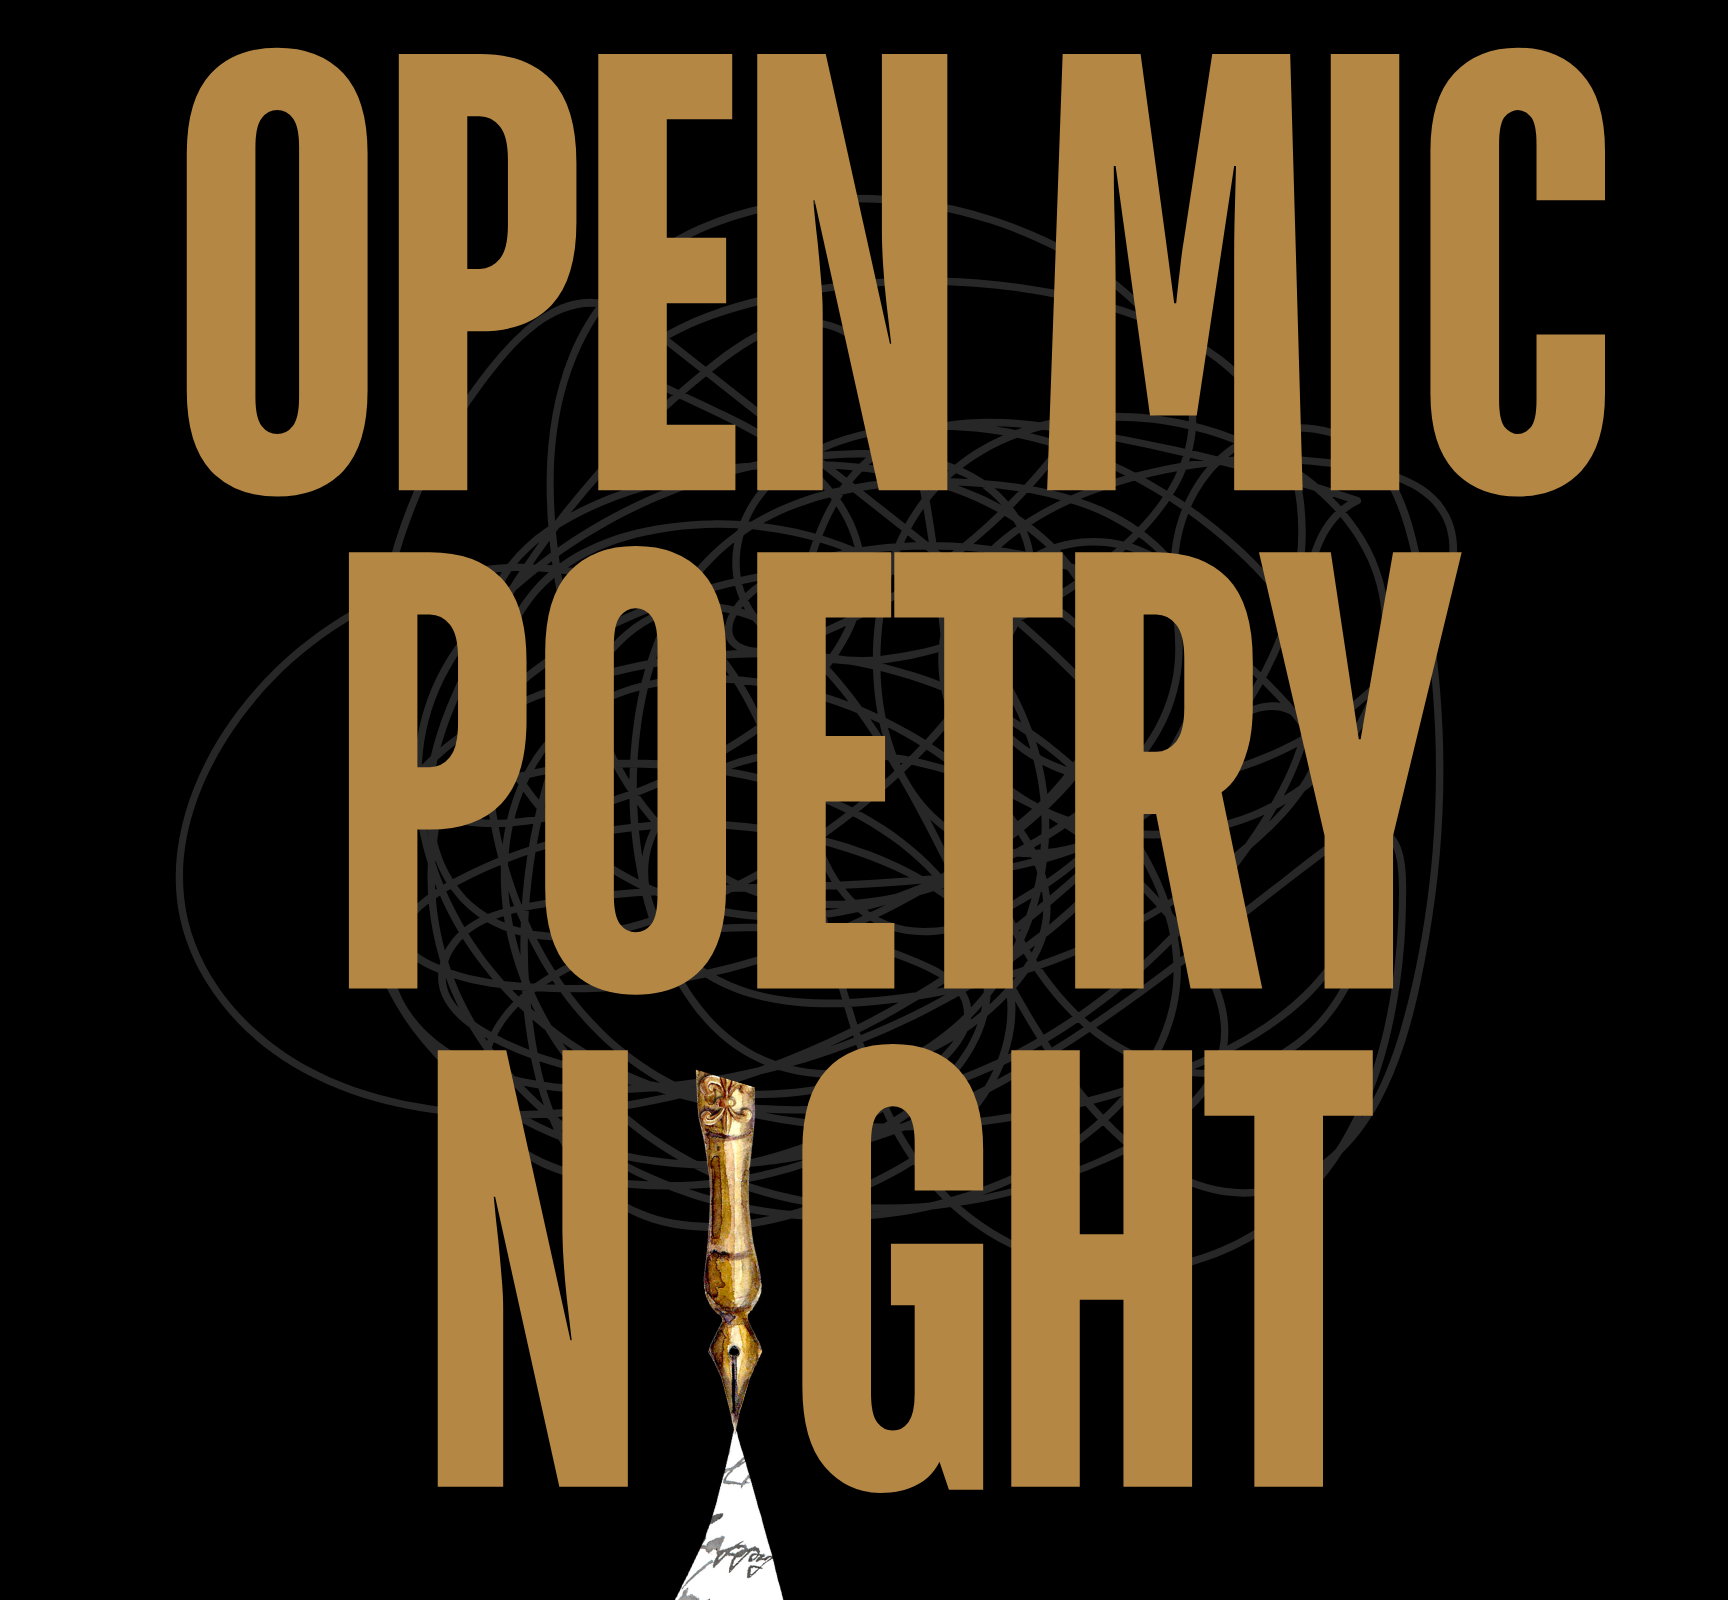 Open Mic Poetry Night in gold letters on a black background